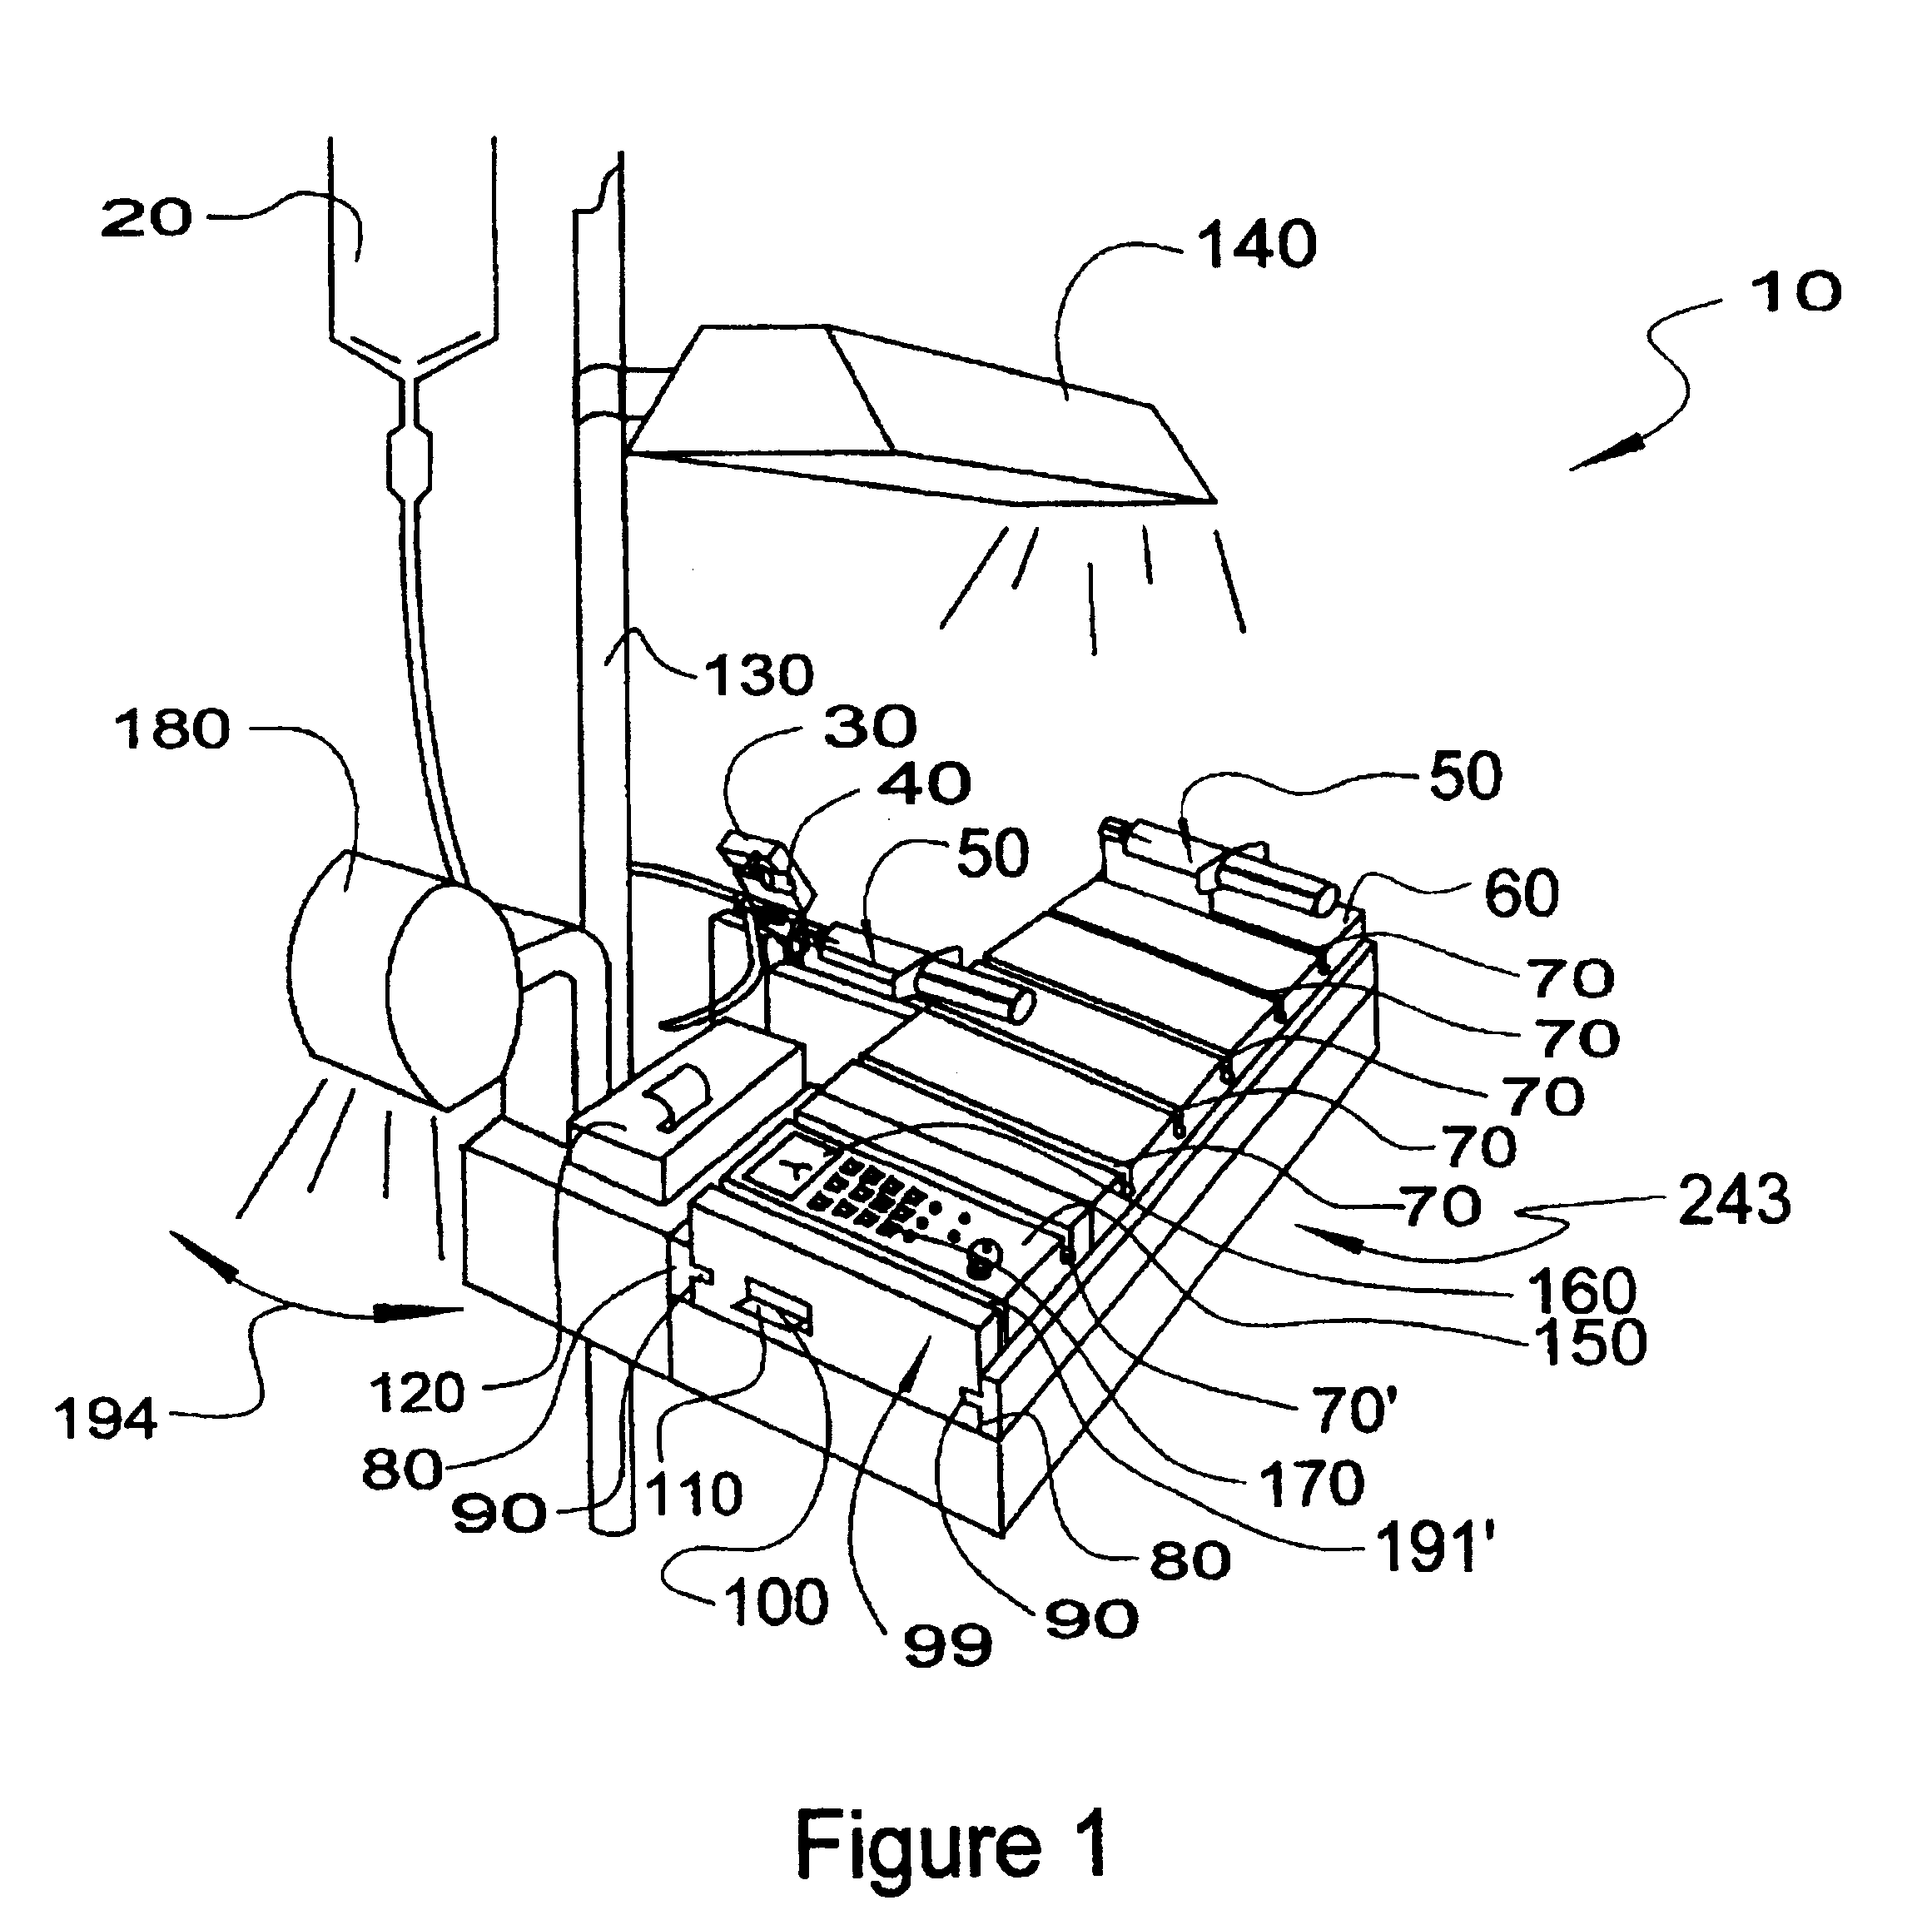 Medication delivery and monitoring system and methods